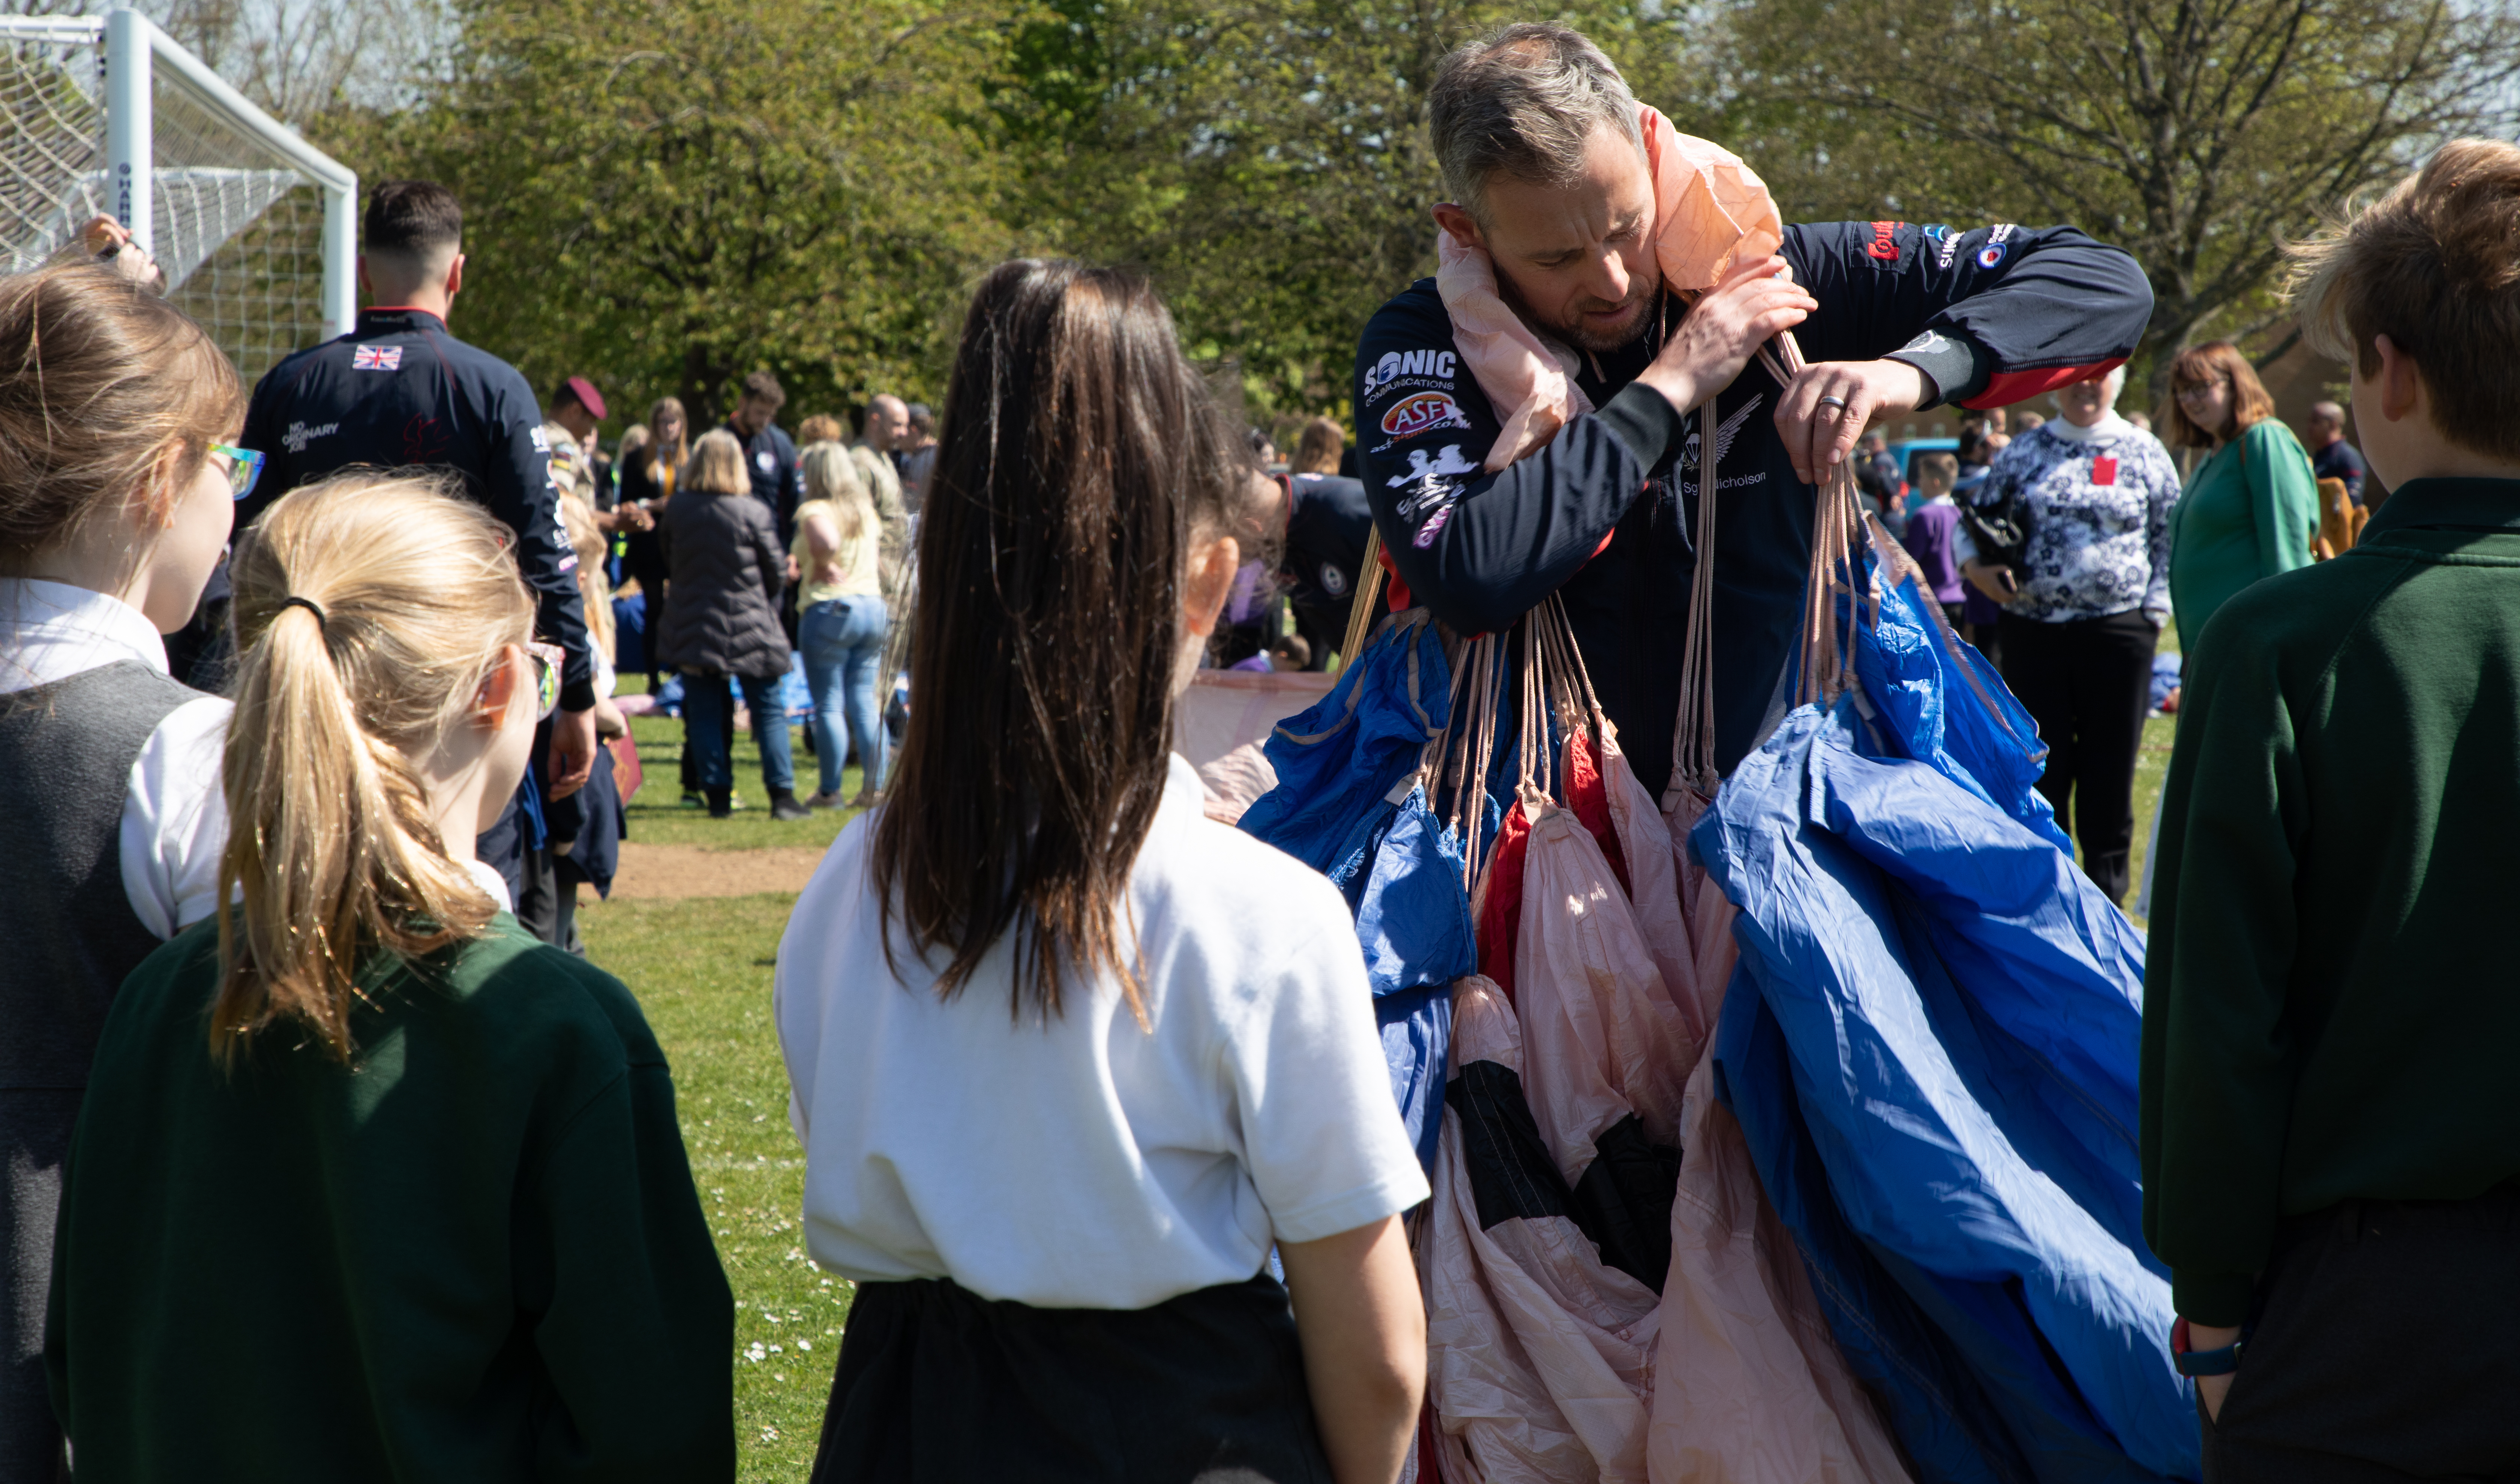 Today (26th April) the RAF Falcons officially began their 2022 season with a spectacular display at RAF Brize Norton, their home base, in front of local schools, sponsors and senior military.